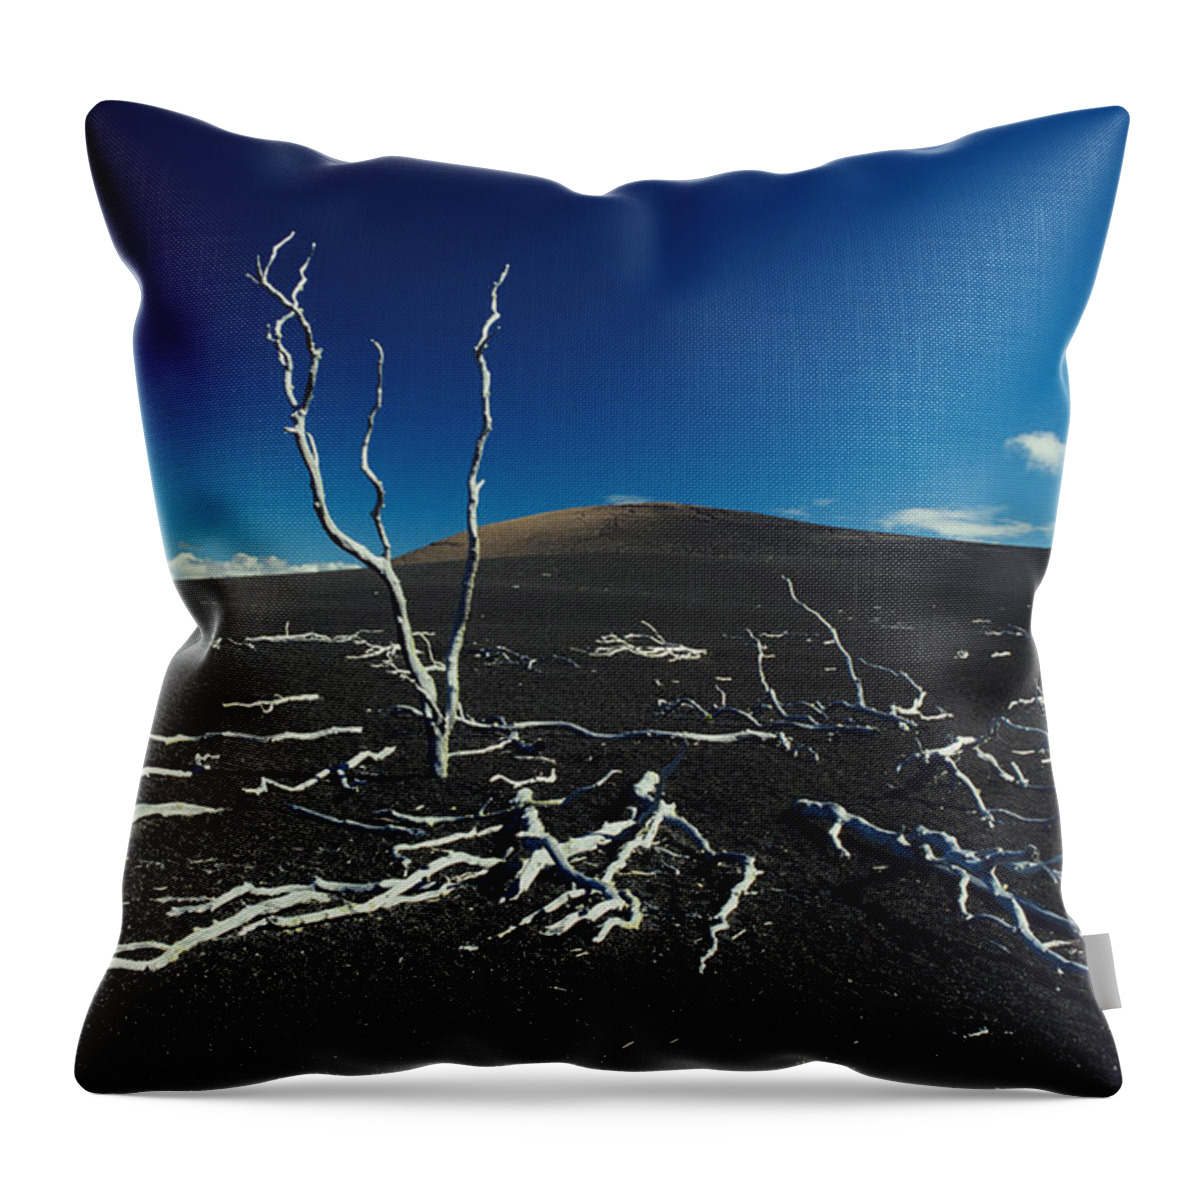 01-csm0018 Throw Pillow featuring the photograph Devastation Trail by Ali ONeal - Printscapes